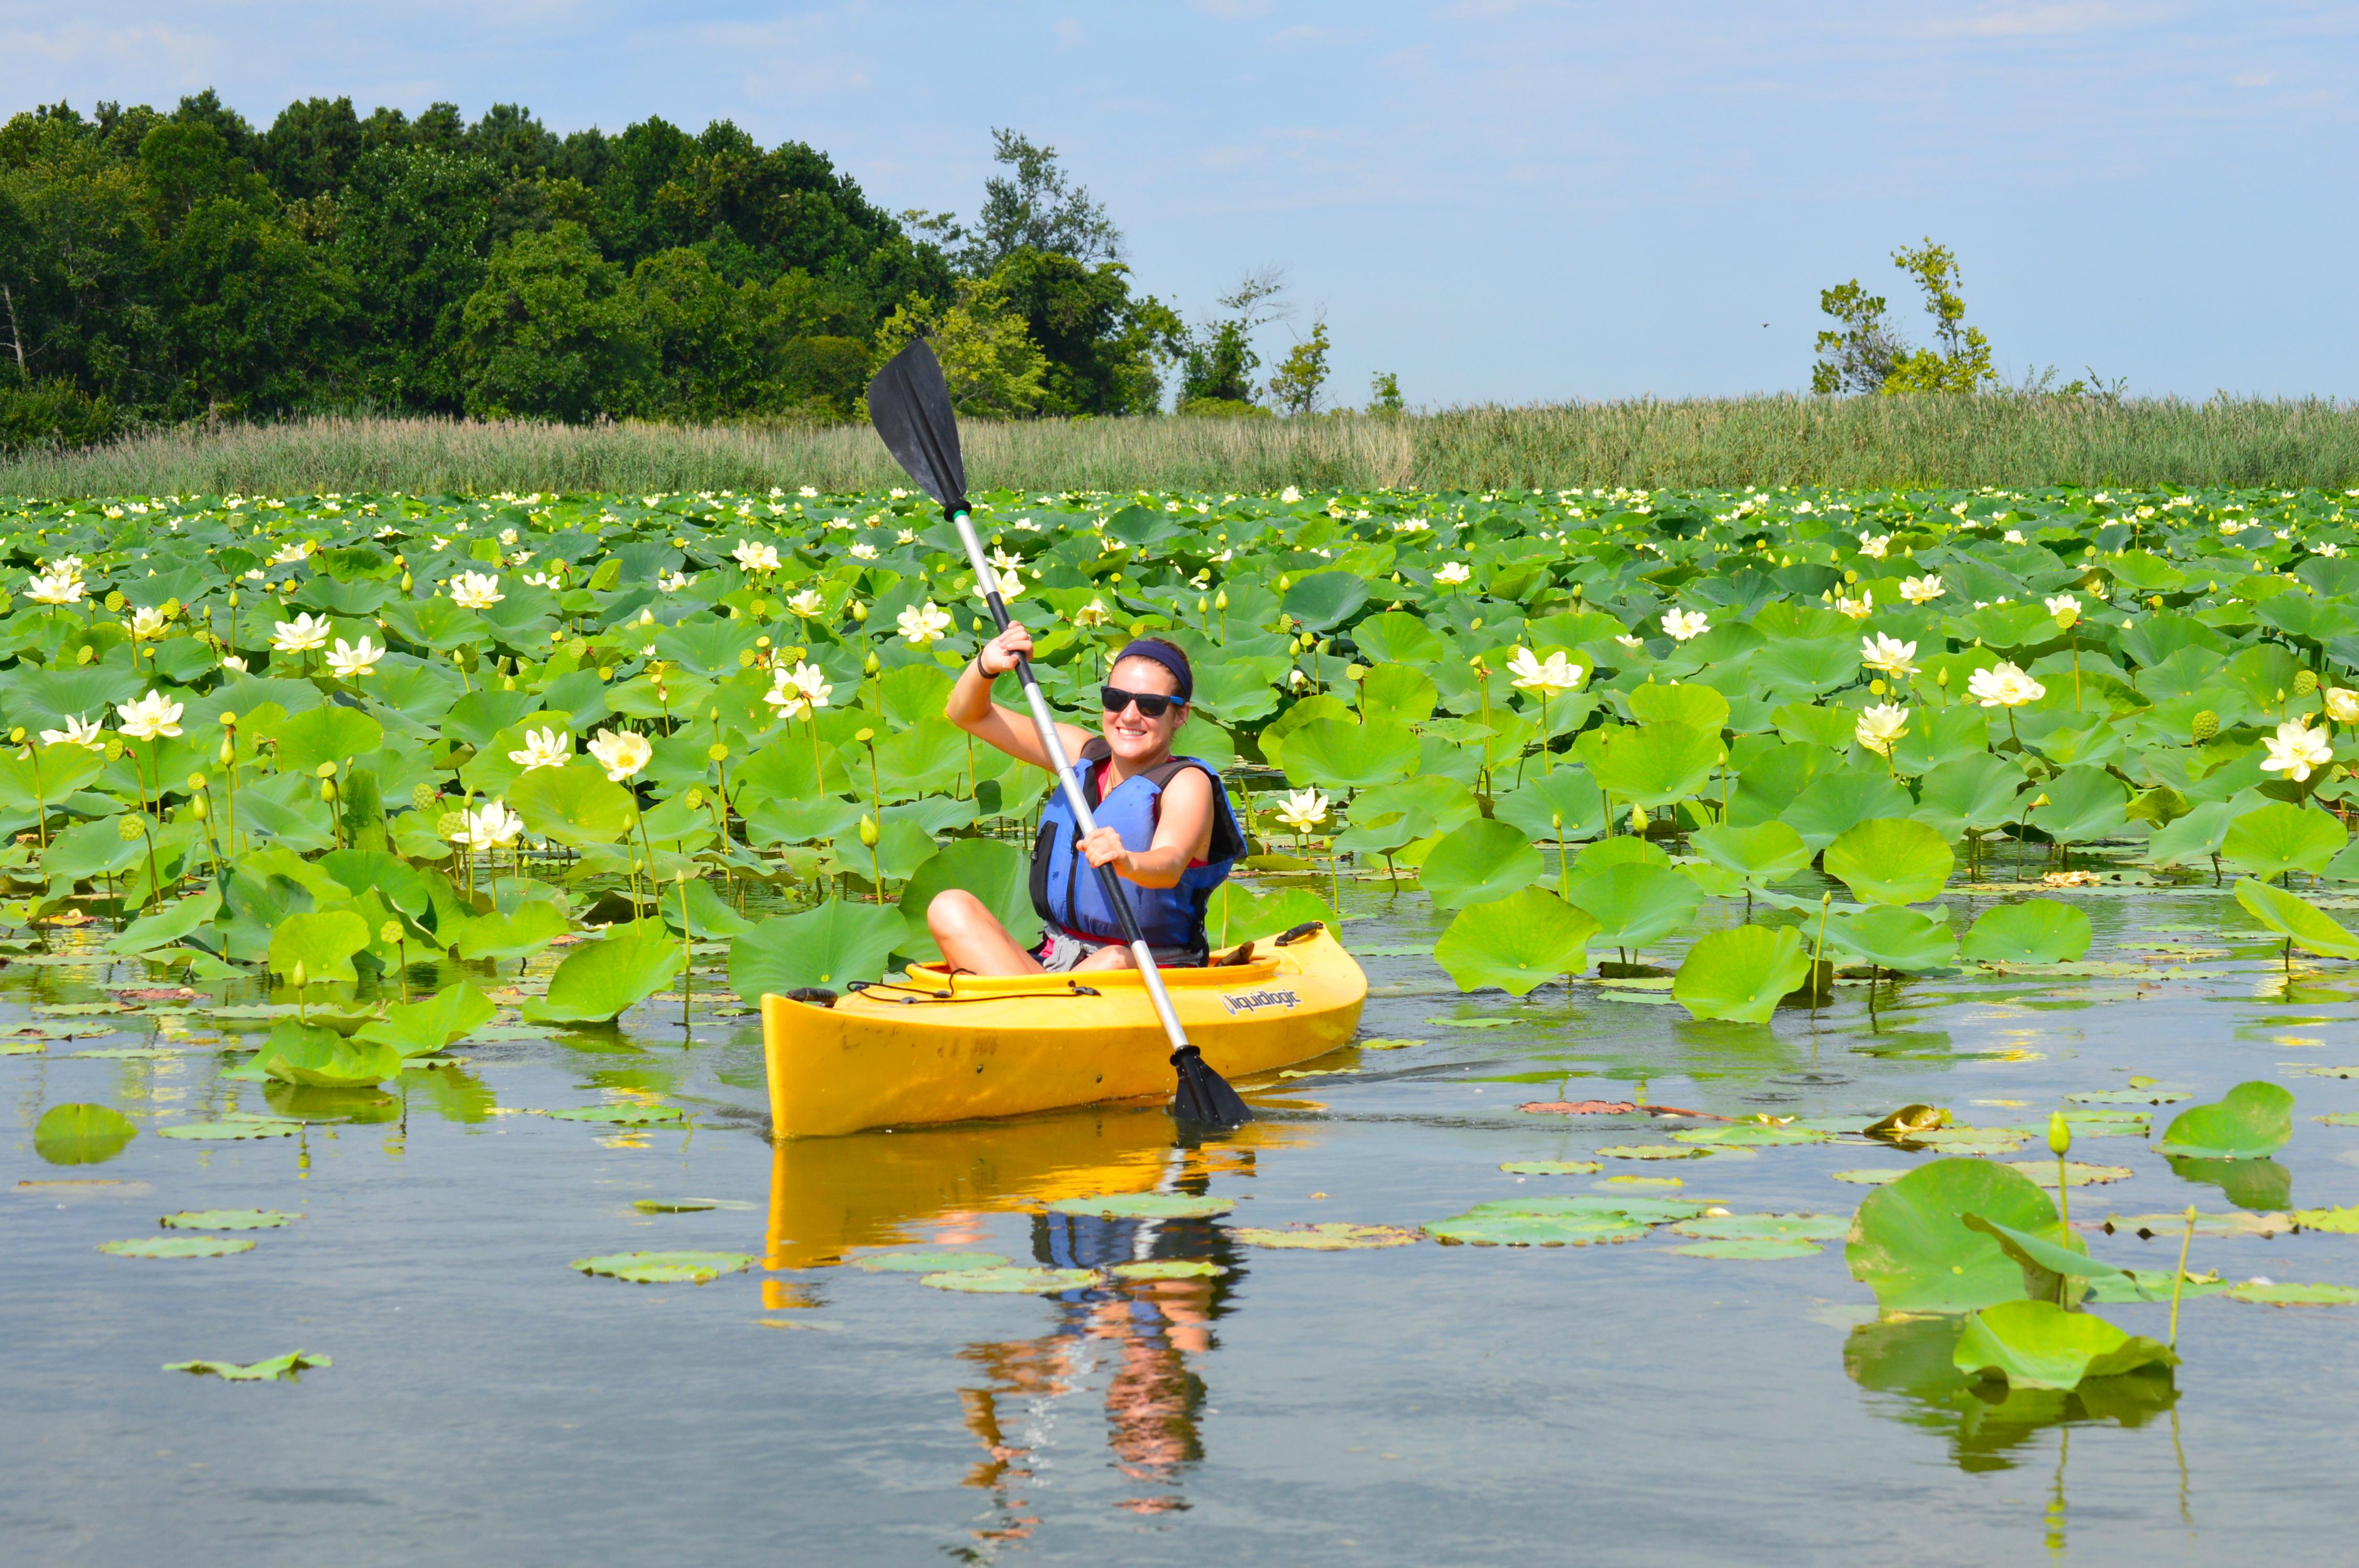 A person in a yellow kayak paddles through lotus blossoms.